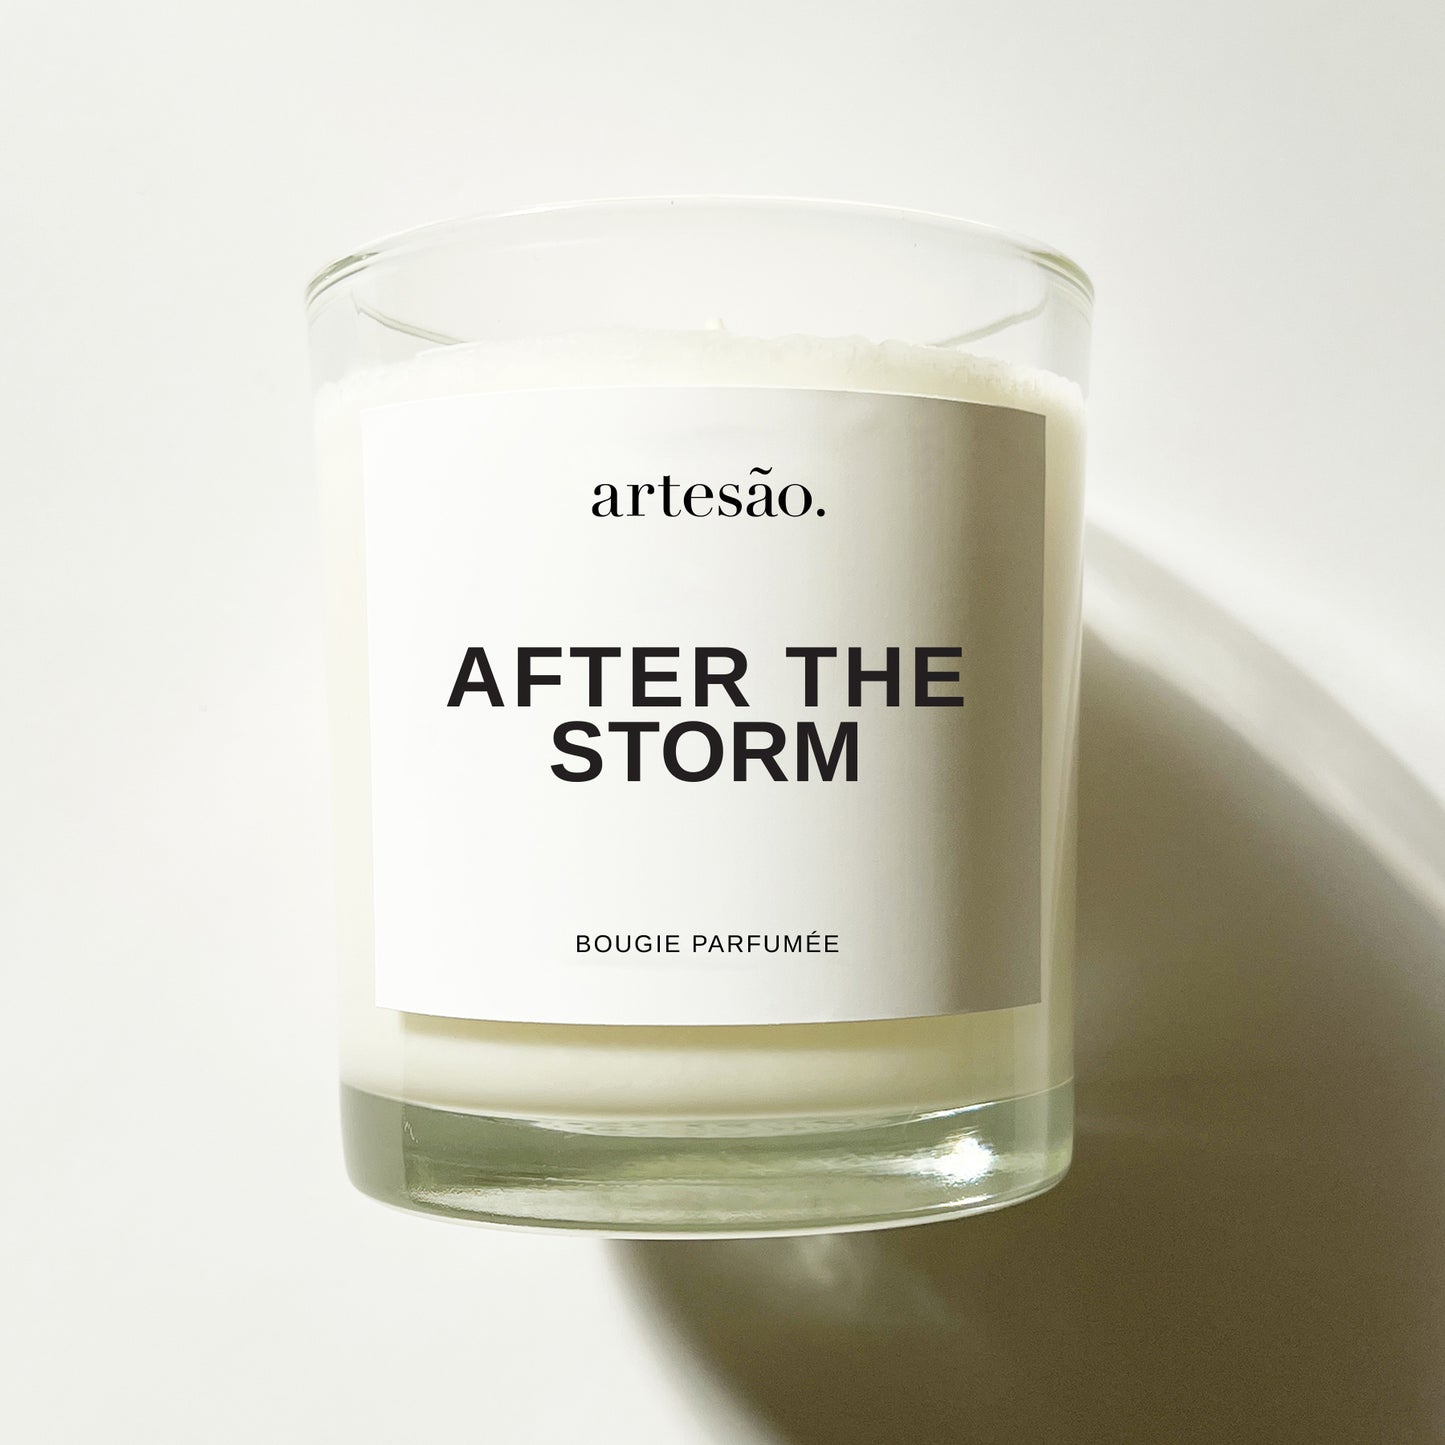 After The Storm Candle - clear glass vessel with white and black label and artesao logo